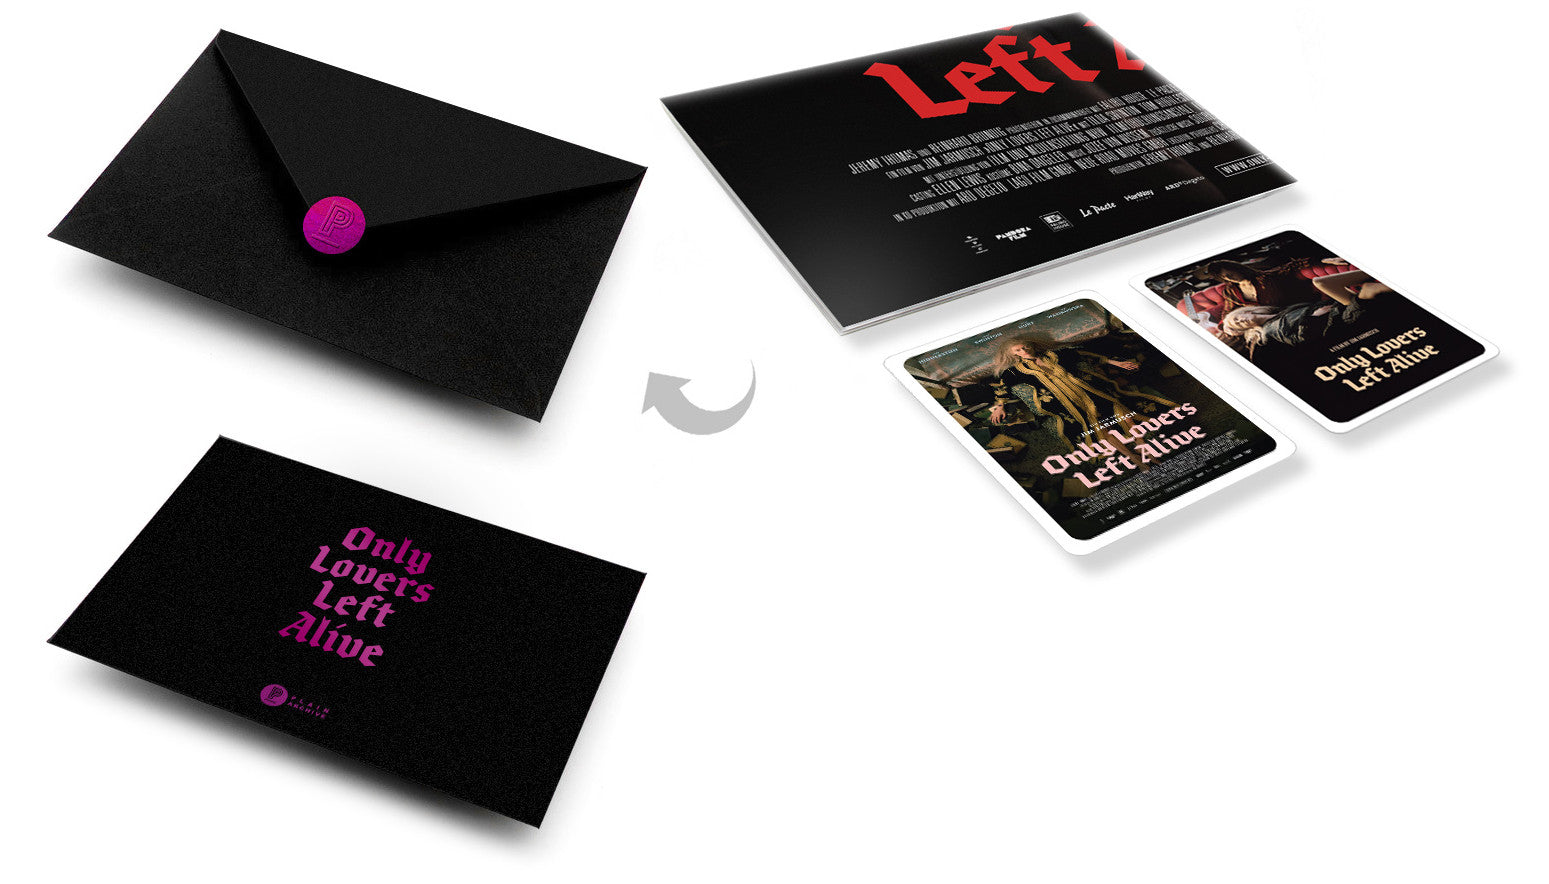 ONLY LOVERS LEFT ALIVE (Design A) : EXCLUSIVE & LIMITED EDITION (PA010)